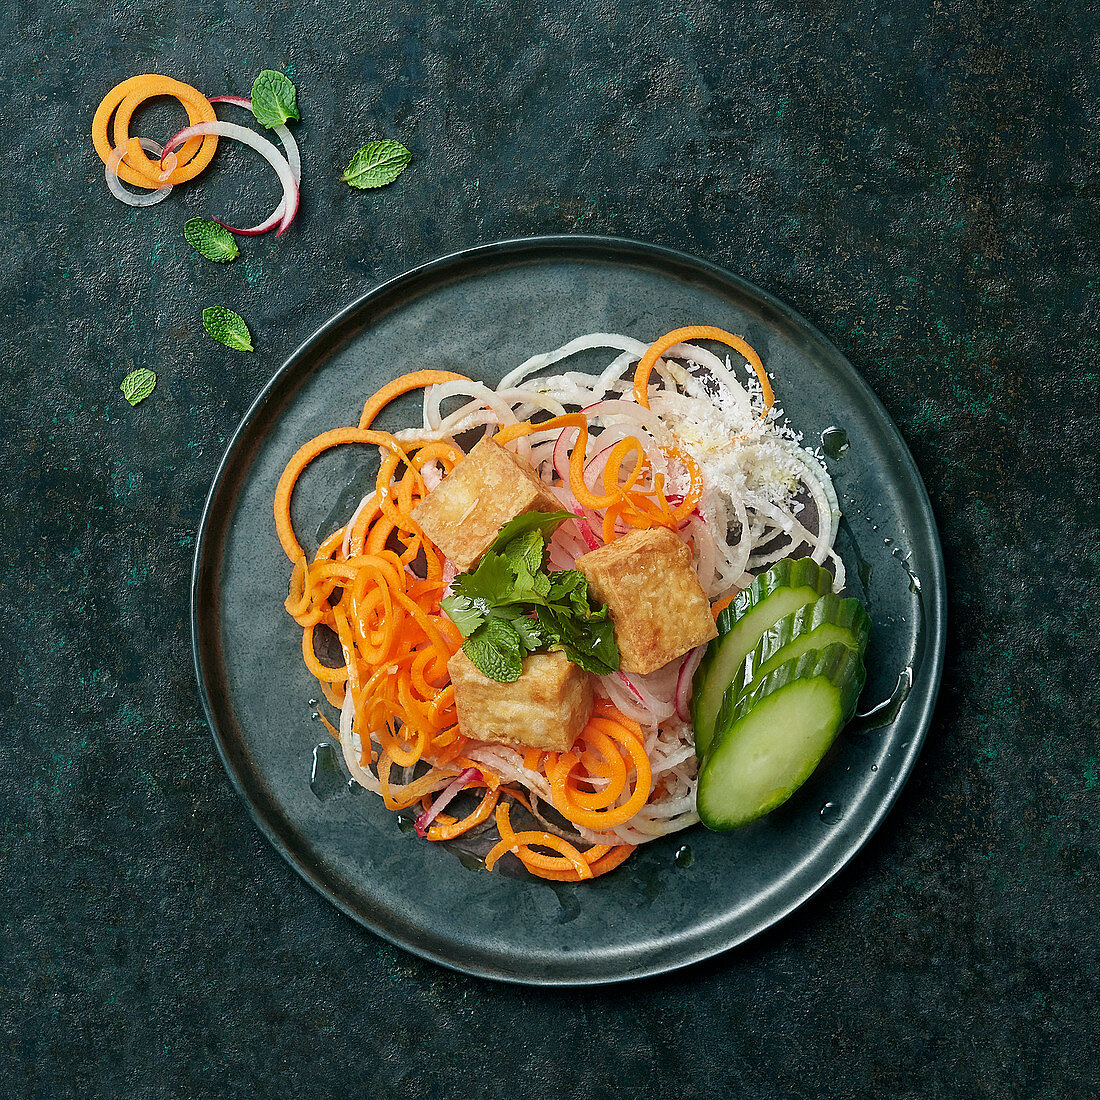 Vegetable spaghetti made with carrots, radish and cucumber with fried tofu